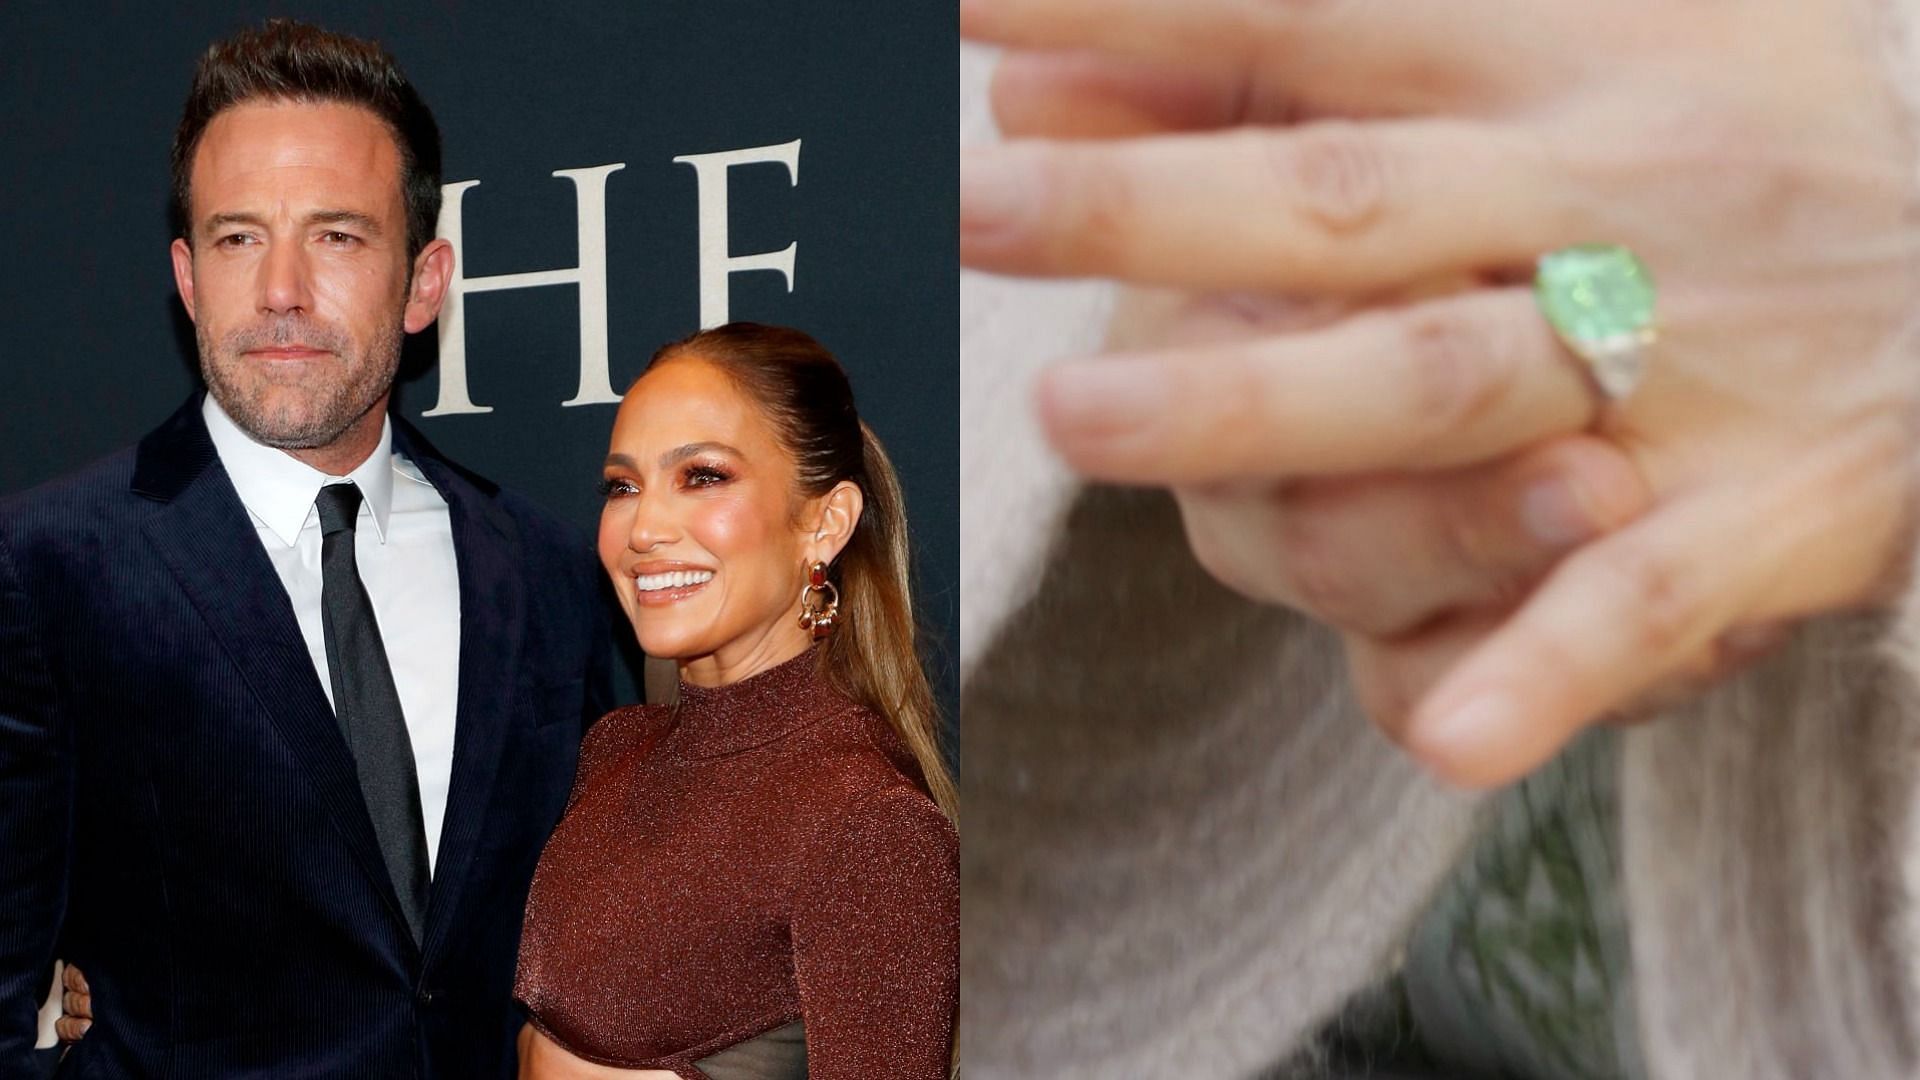 Jennifer Lopez and Ben Affleck are reportedly engaged (Image via Astrid Stawiarz/Getty Images and Jennifer Lopez)